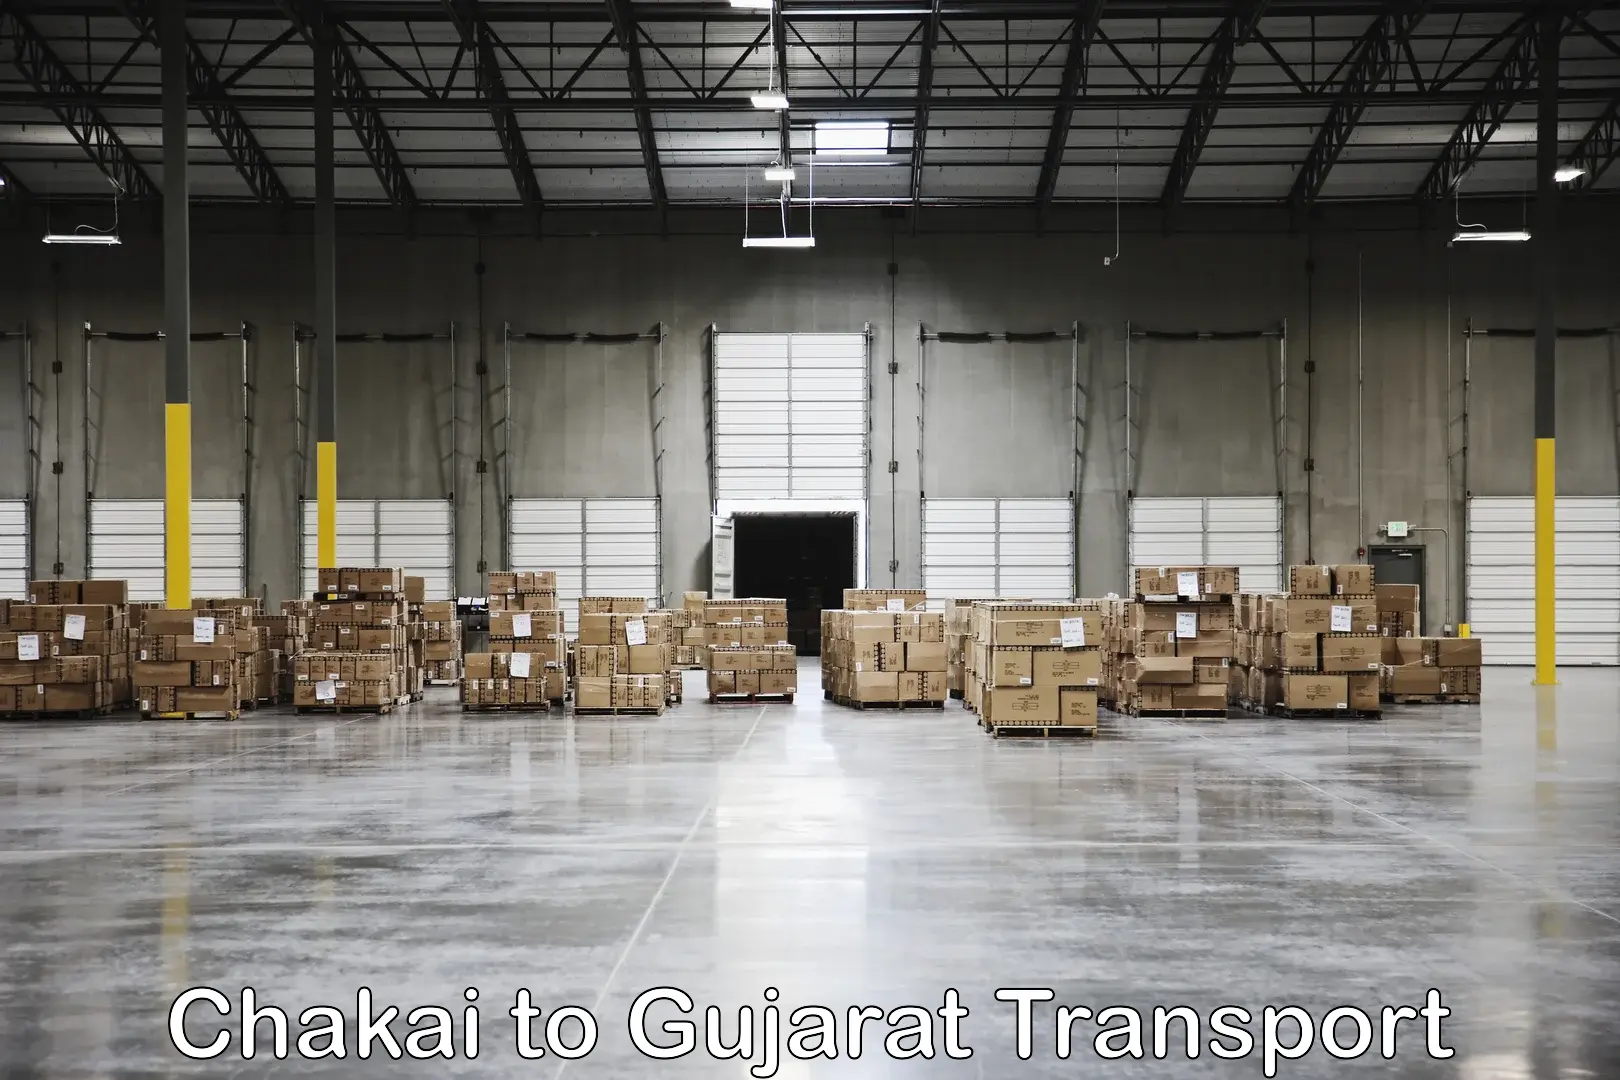 Air freight transport services in Chakai to Dwarka